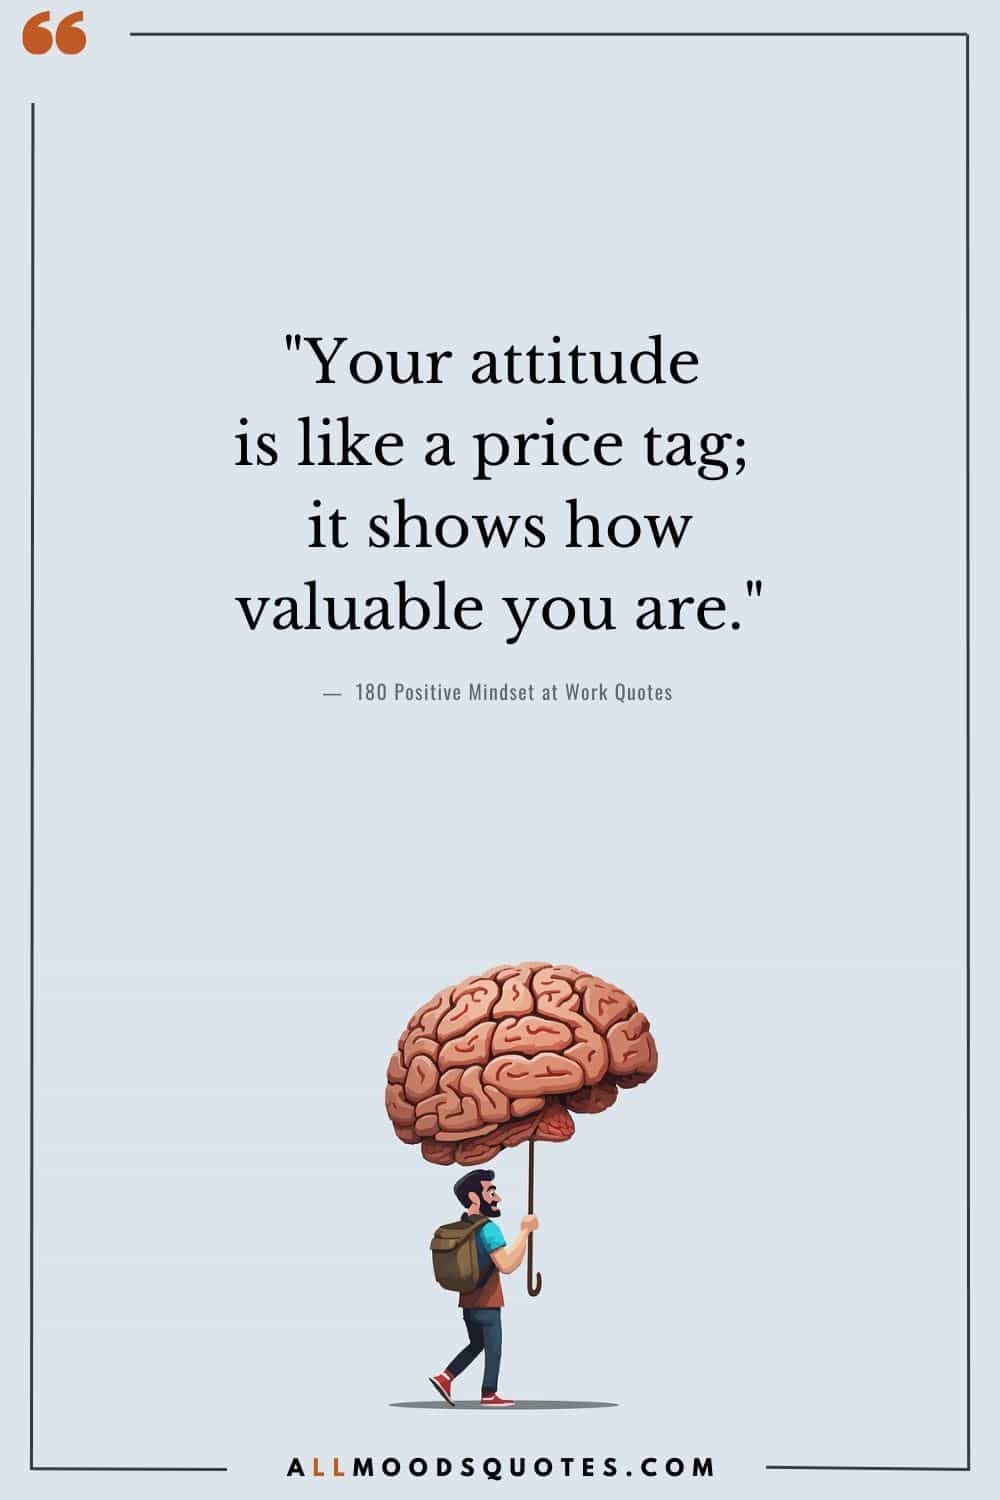 Inspirational Quotes about Attitude at Work